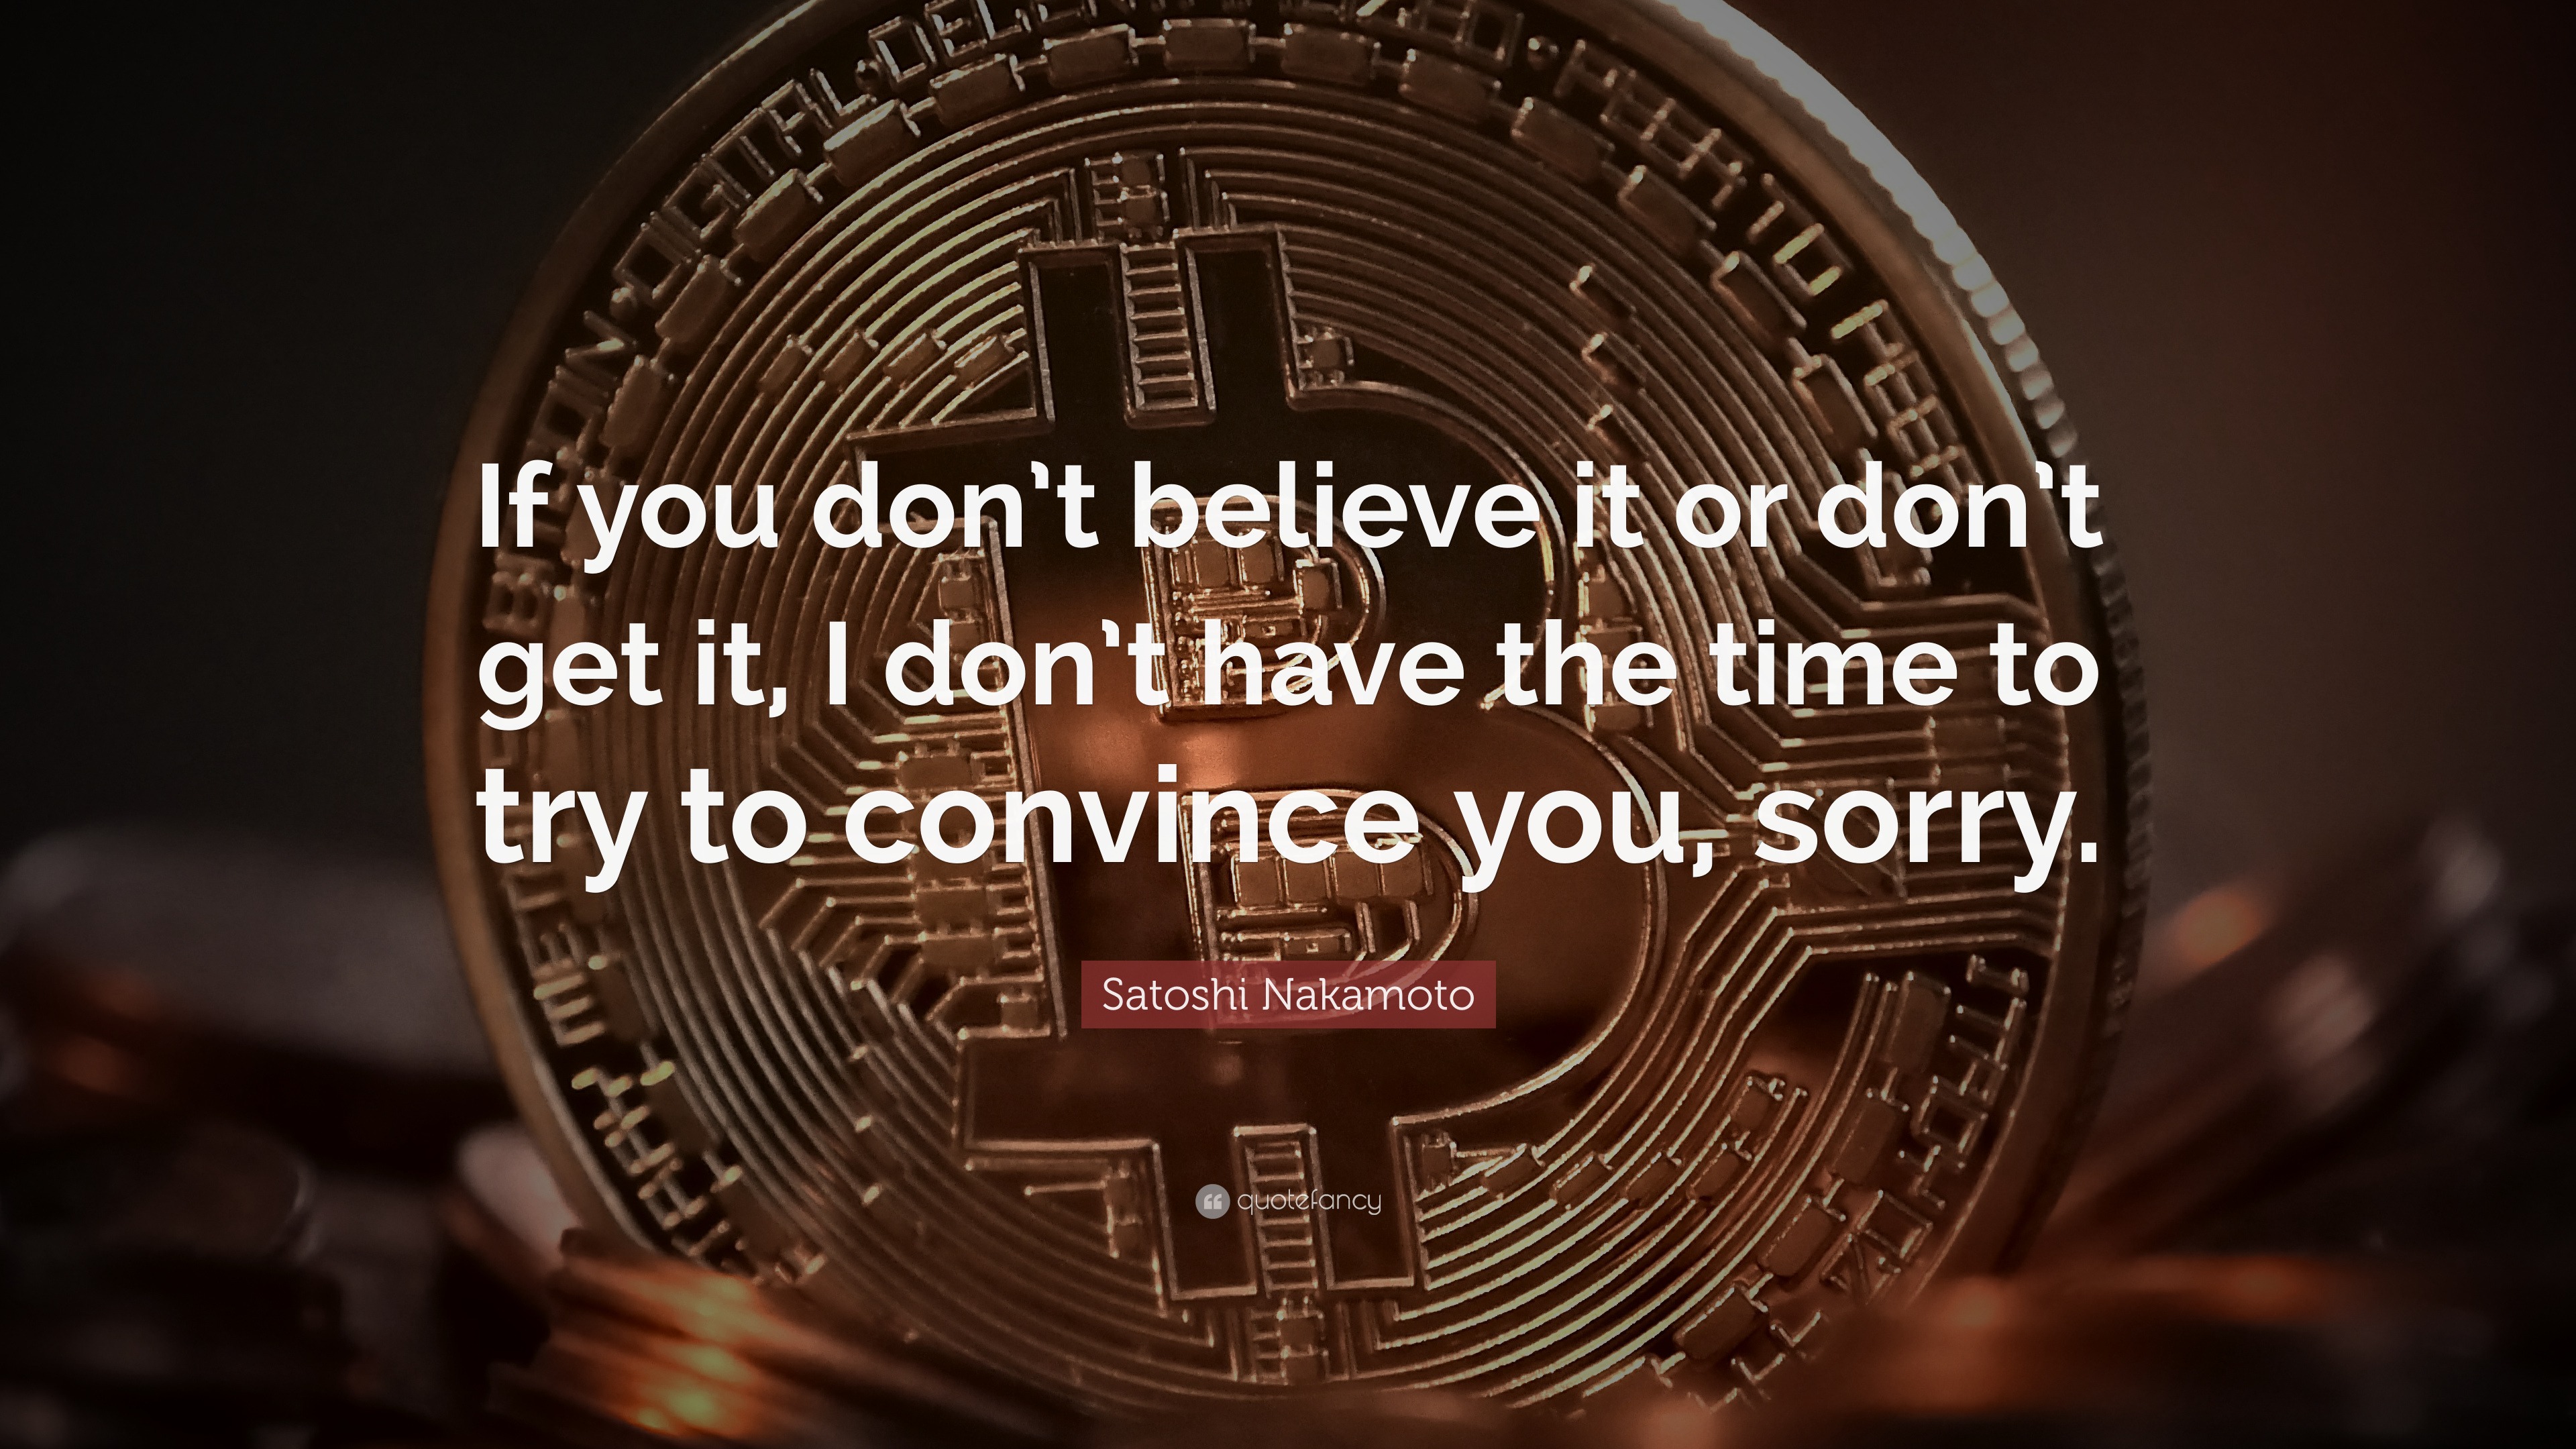 Satoshi Nakamoto Quote: “If you don't believe it or don't get it, I don